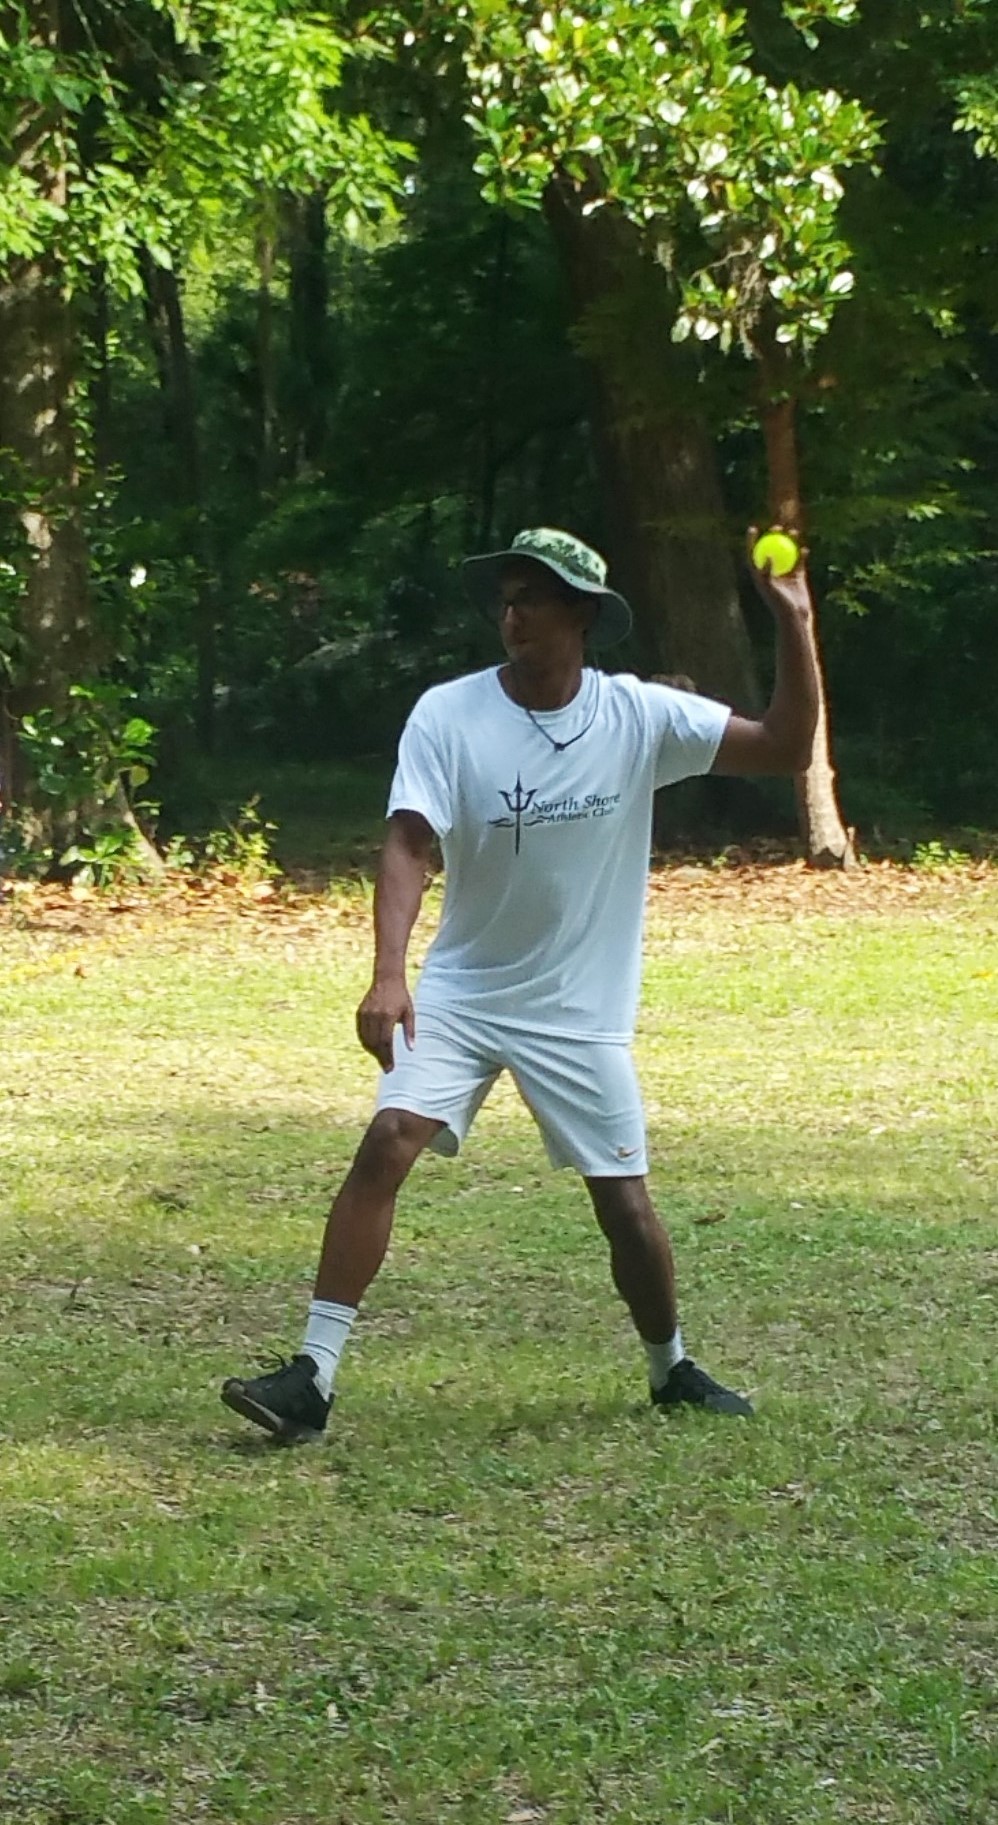 Counselor Jordan Walker pitches in a game of baseball